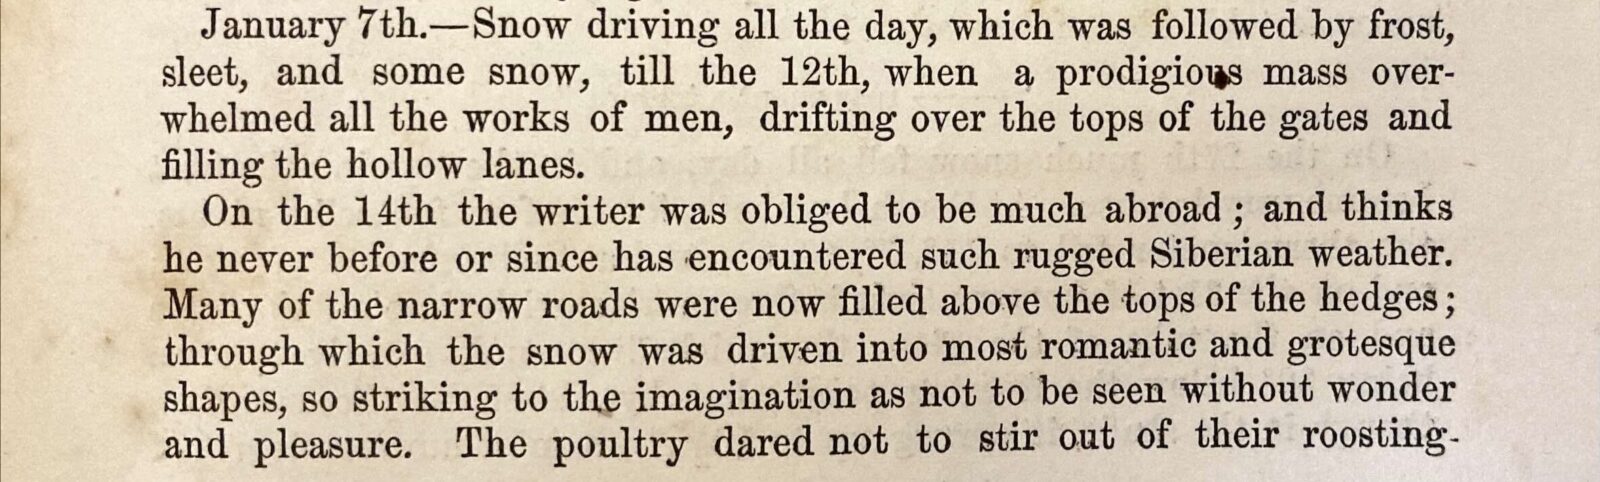 Extract from Gilbert White's 'Natural history of Selborne' (1789)